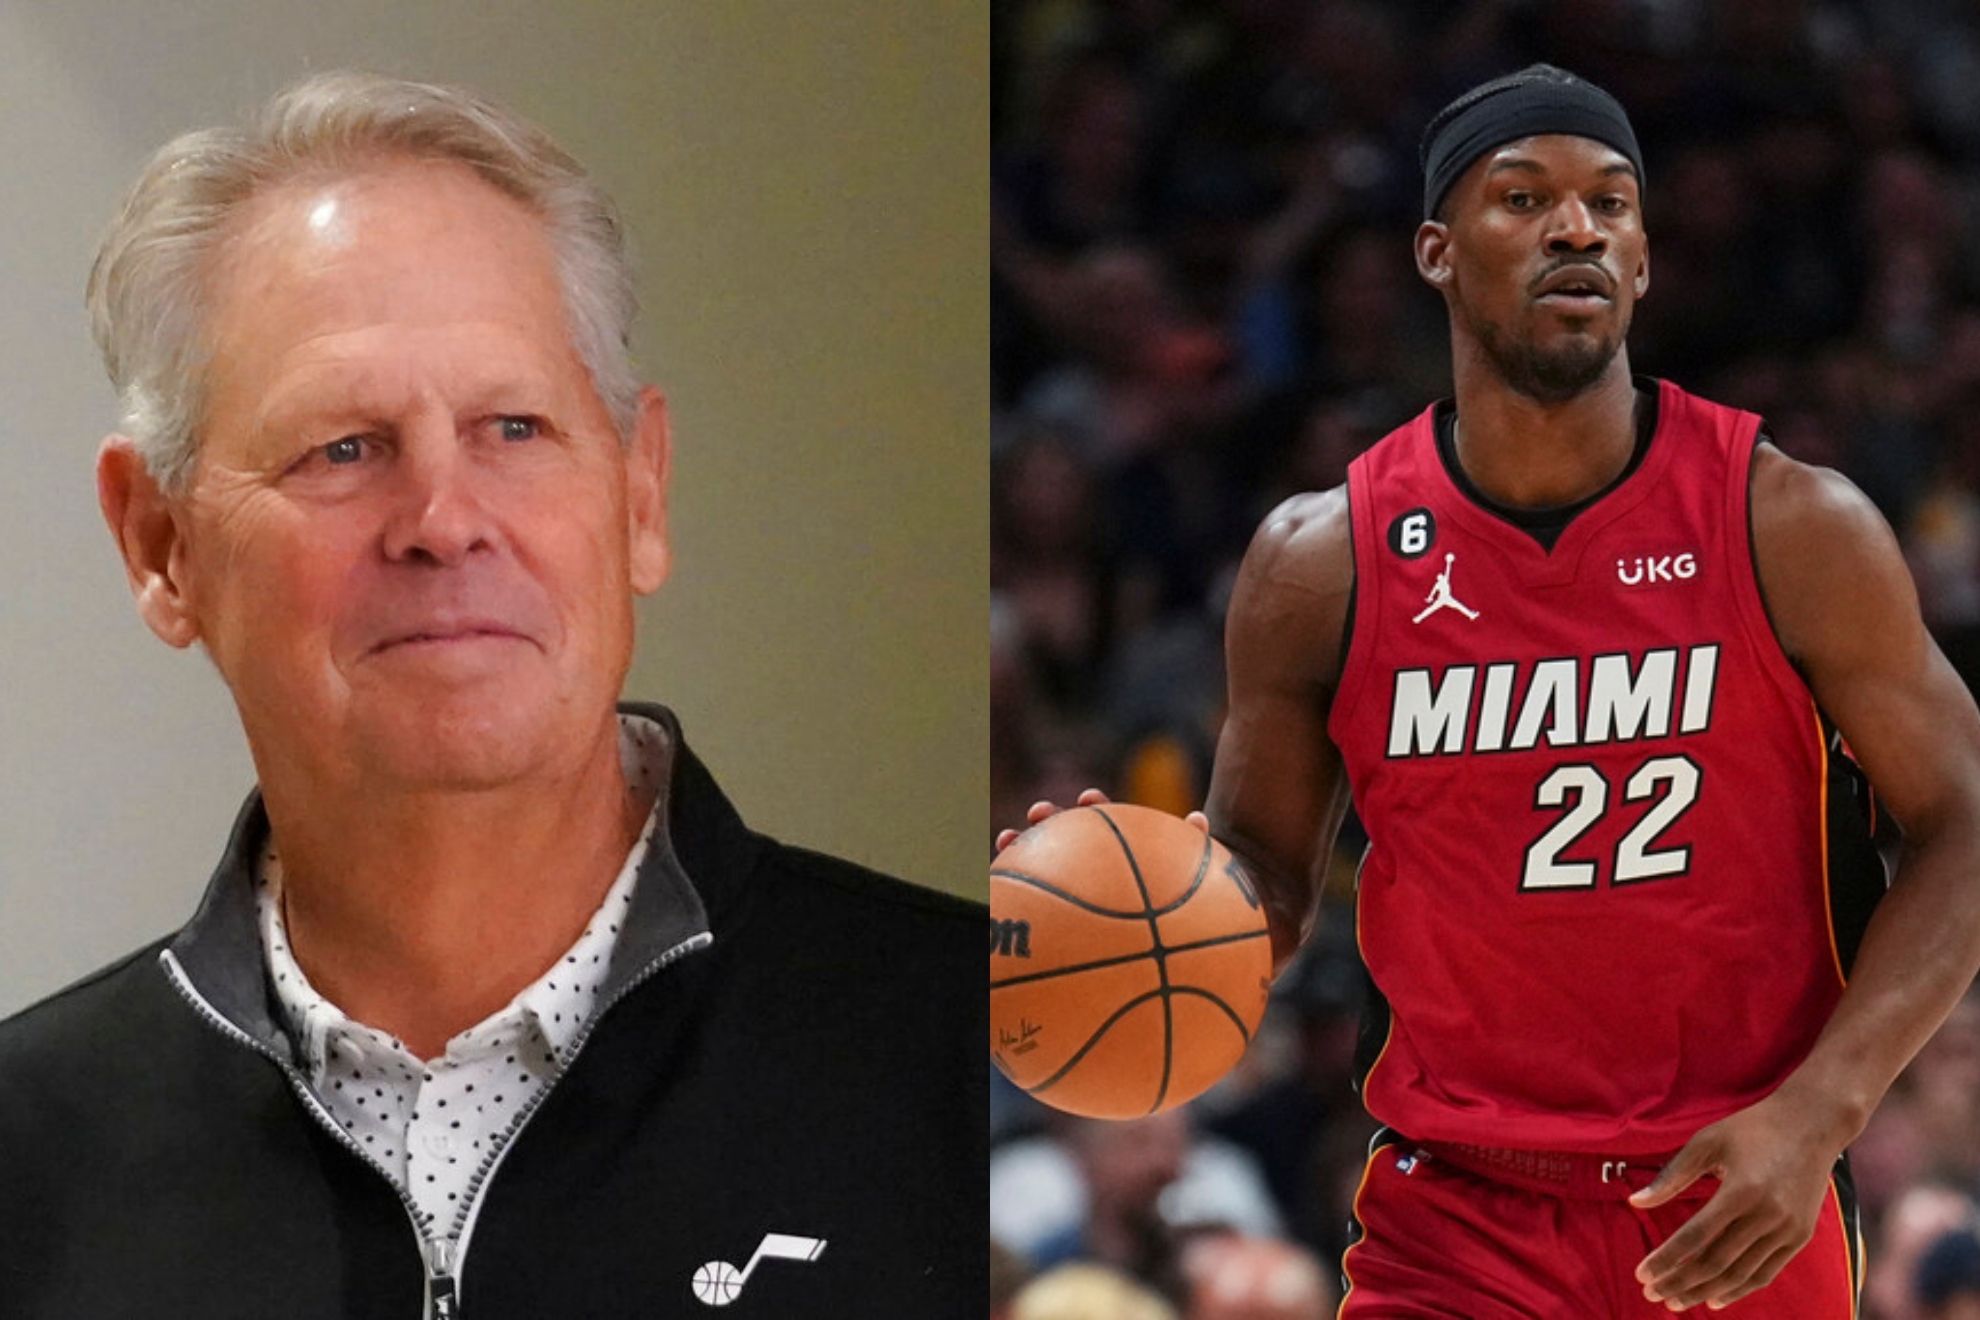 Ainge revealed how he almost traded for Jimmy Butler